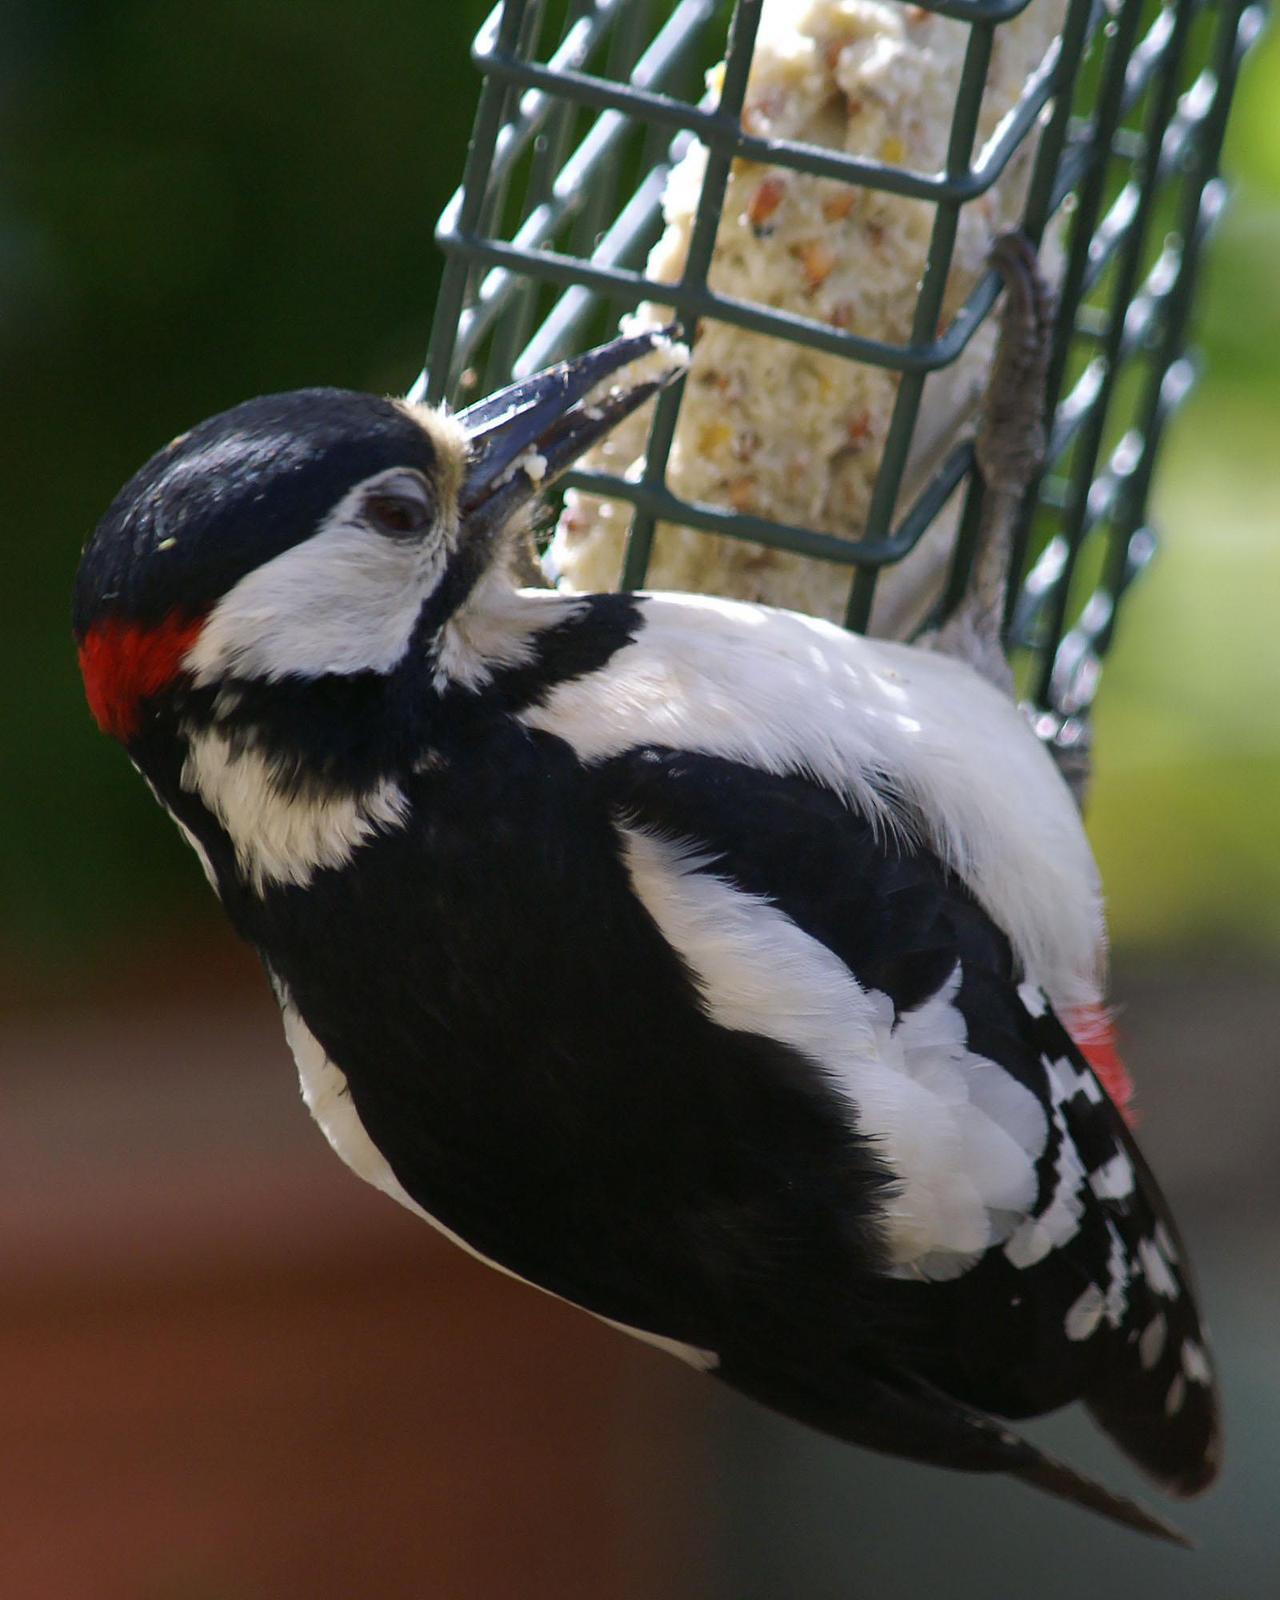 Great Spotted Woodpecker Photo by Steve Percival